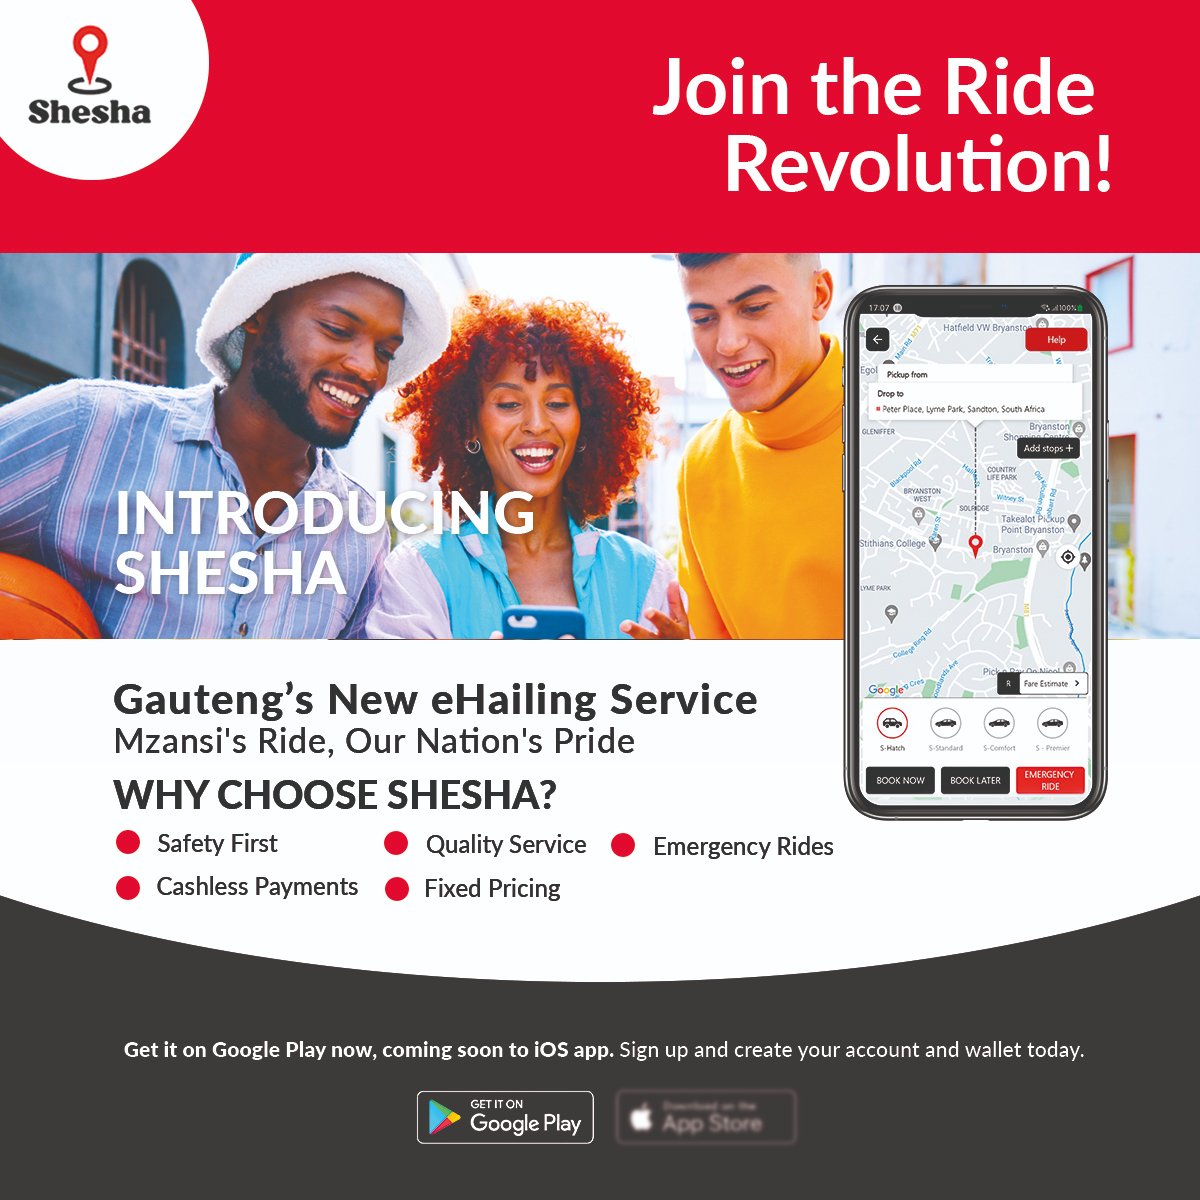 Gauteng's new eHailing Service is Here! Join the Ride Revolution - Download the App from Google Play & Book your First Ride:
play.google.com/store/apps/det…
#ehailing #bookaride #gauteng #proudlysouthafrican #joburglife